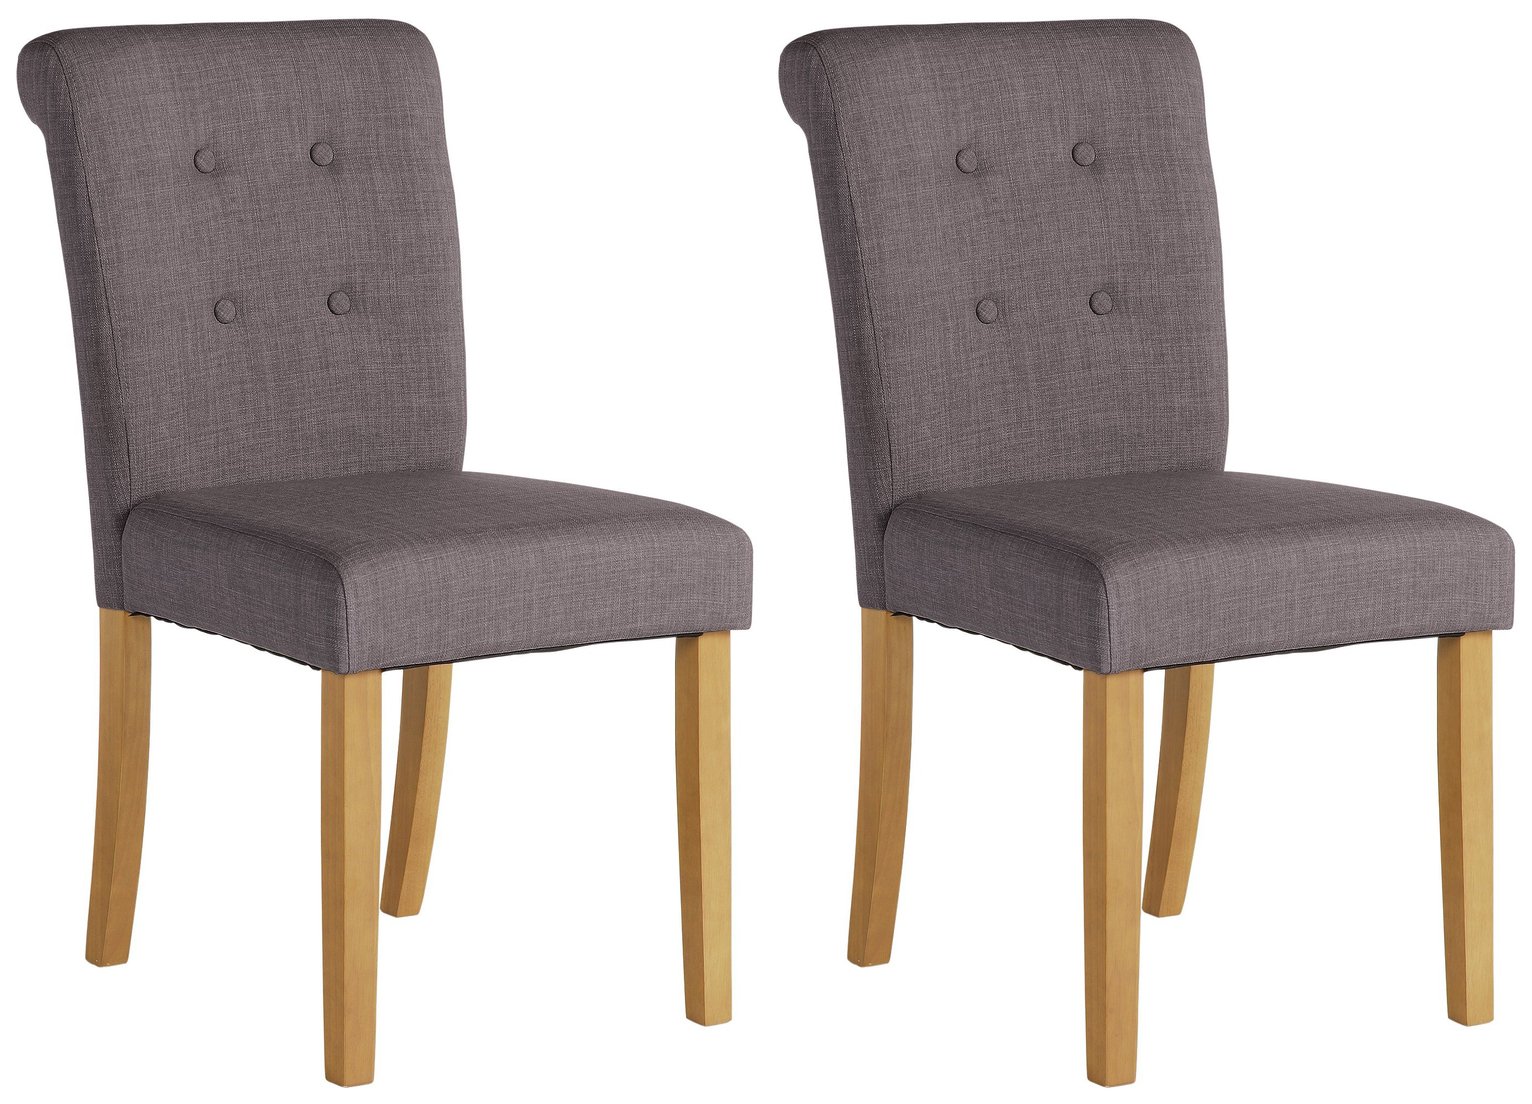 Argos Home Pair of Stroud Scroll Back Chairs - Charcoal